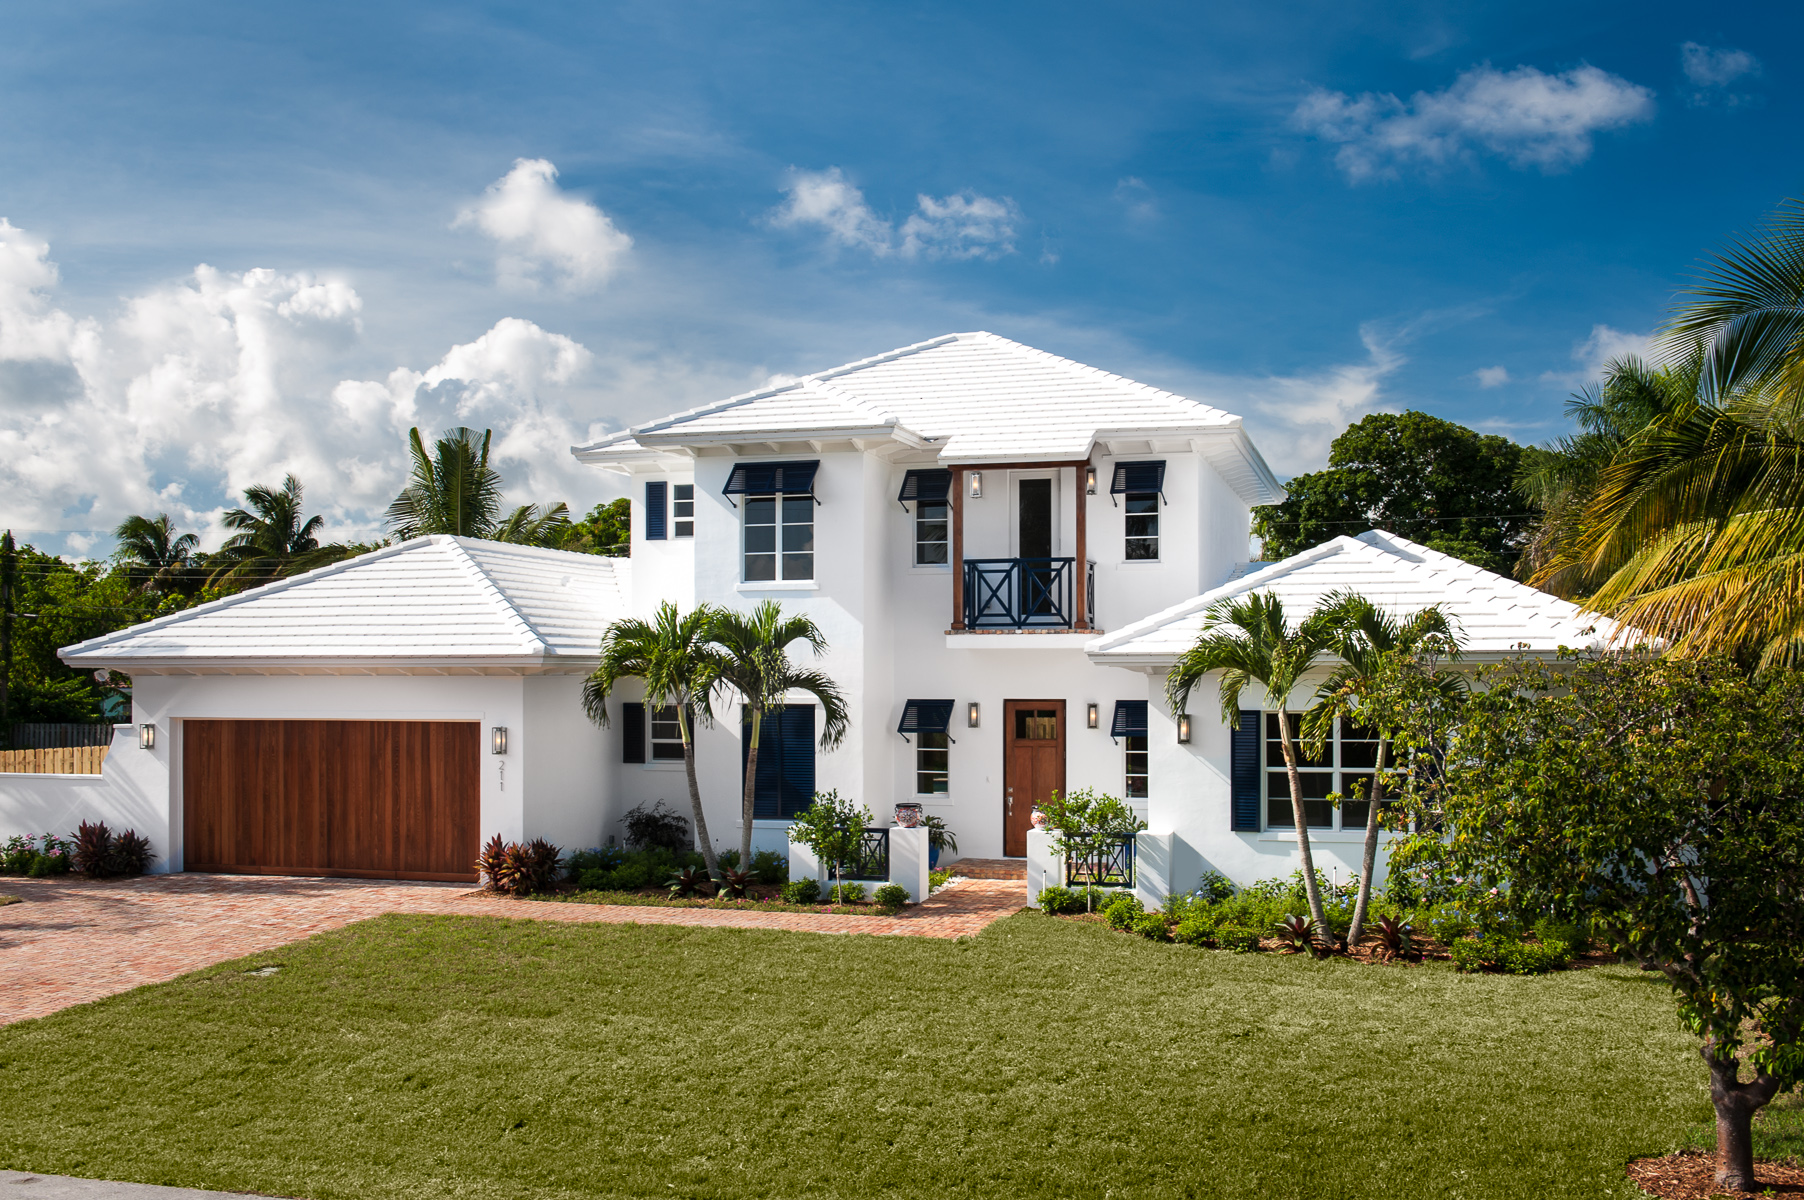 a white house with palm trees and a garage.